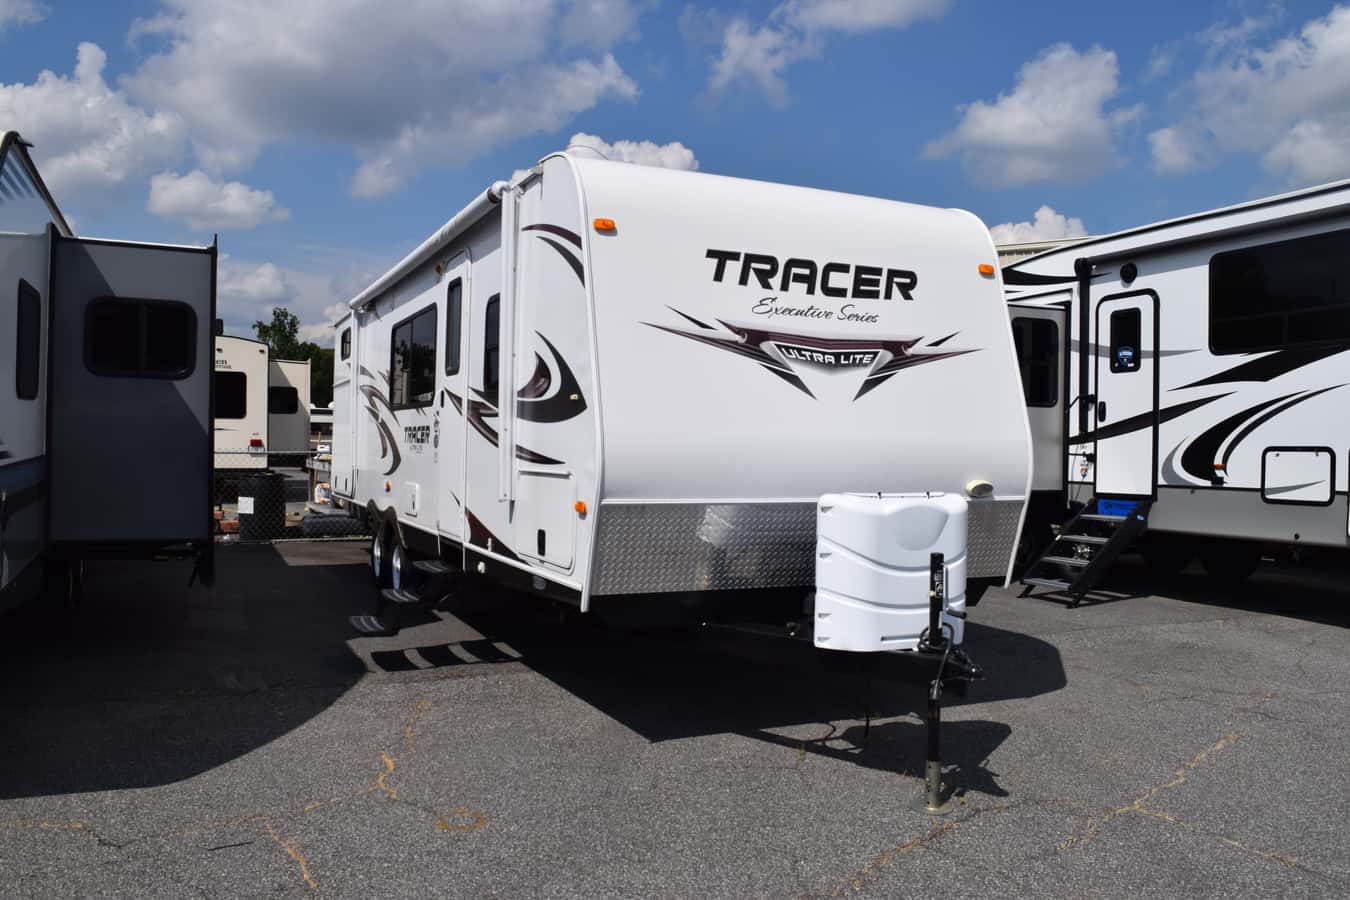 USED 2012 Prime Time TRACER 2910BHS